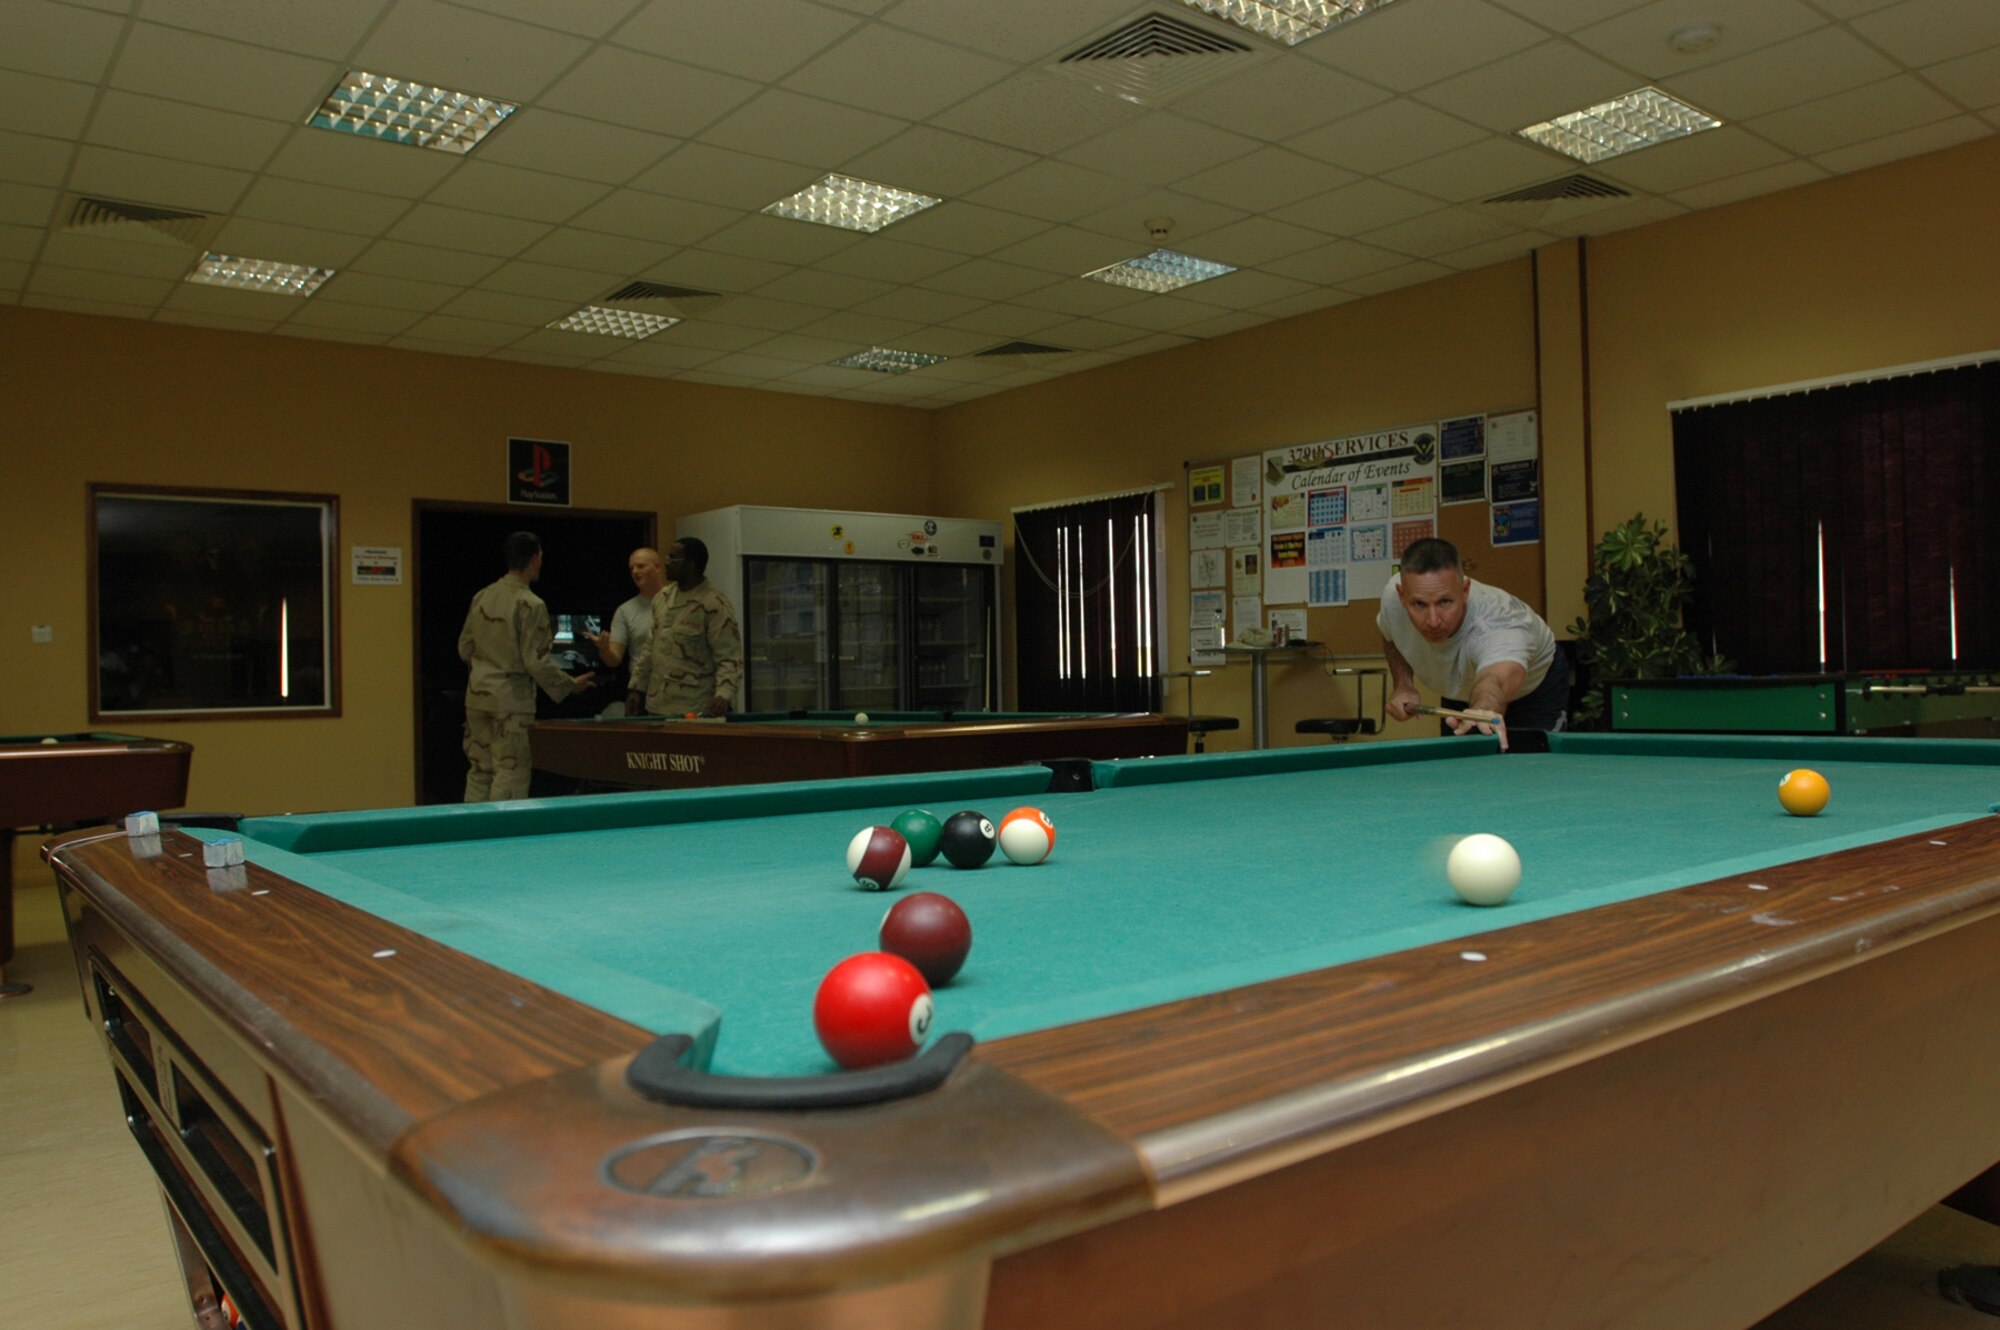 Lt. Col. Larry Audte sinks a ball in a game of pool at the Community Activity Center Wednesday. Colonel Audte was here for several days, en route from Baghdad to his new assignment at the Pentagon. He is one of many transient personnel who will be spending time here while they await transportation in and out of the area of responsibility. (U.S. Air Force photo by Senior Airman Clark Staehle)